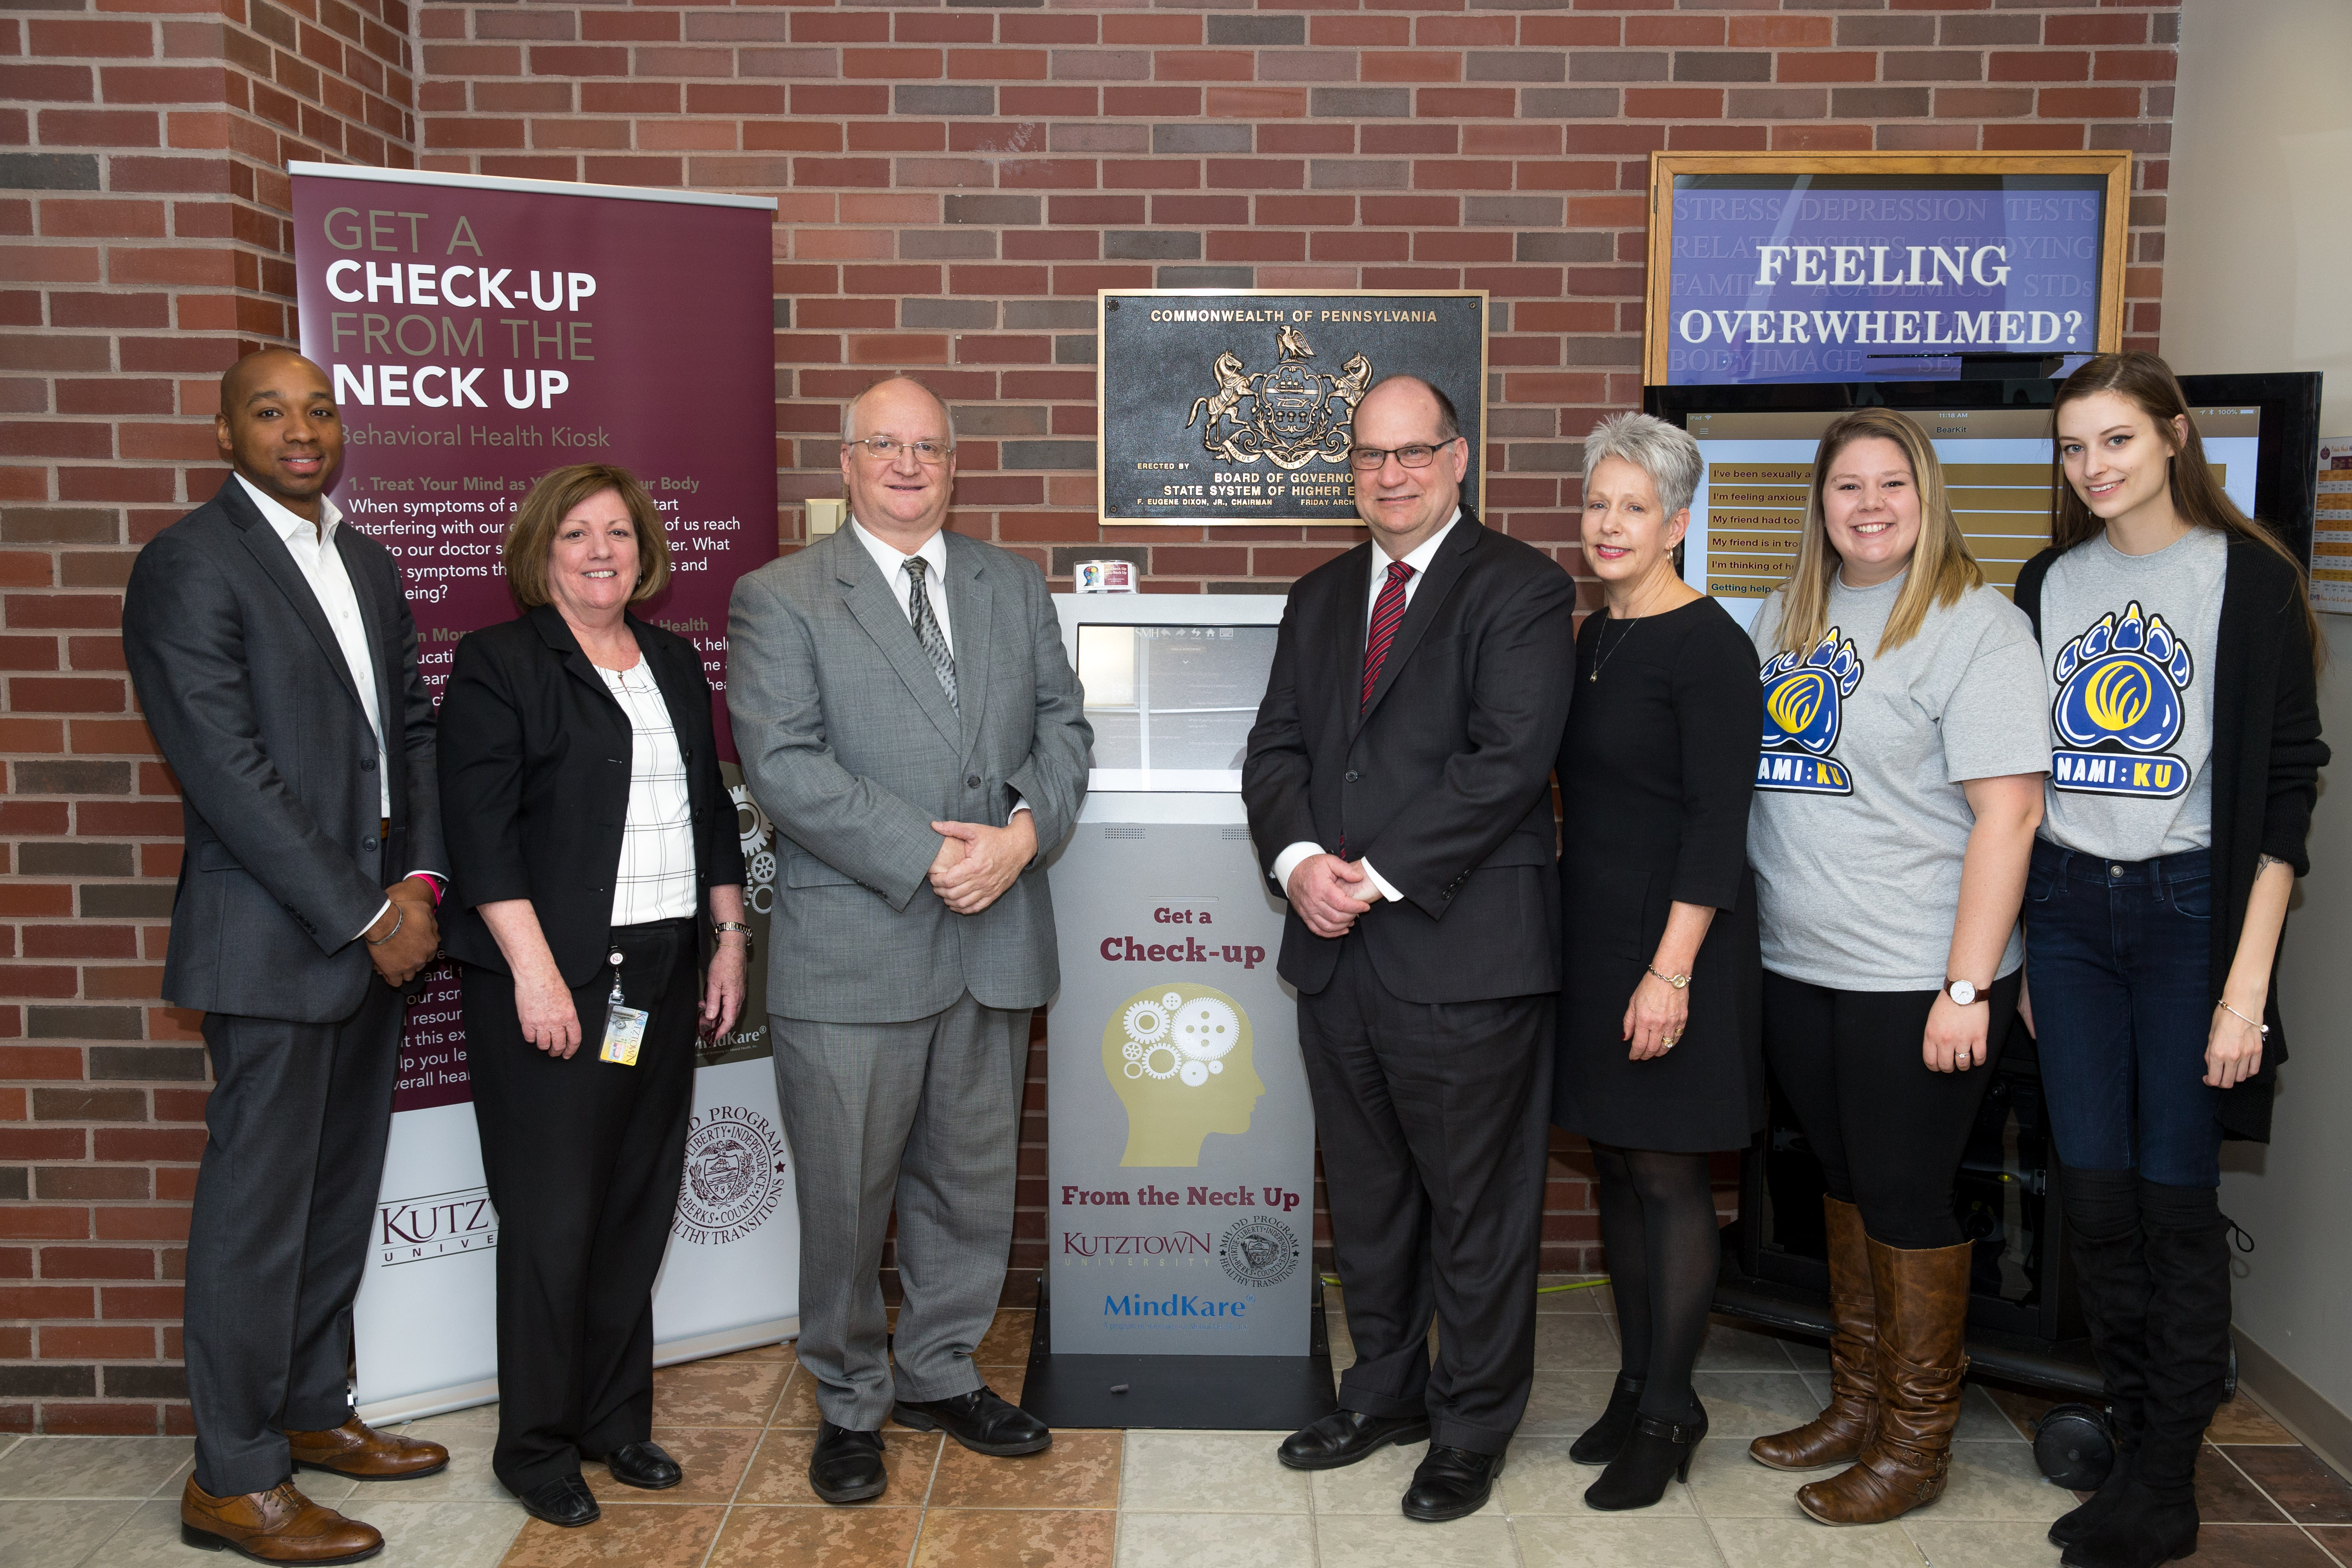 President Hawkinson, Staff, and Students standing on either side of the MindKare mental health kiosk 